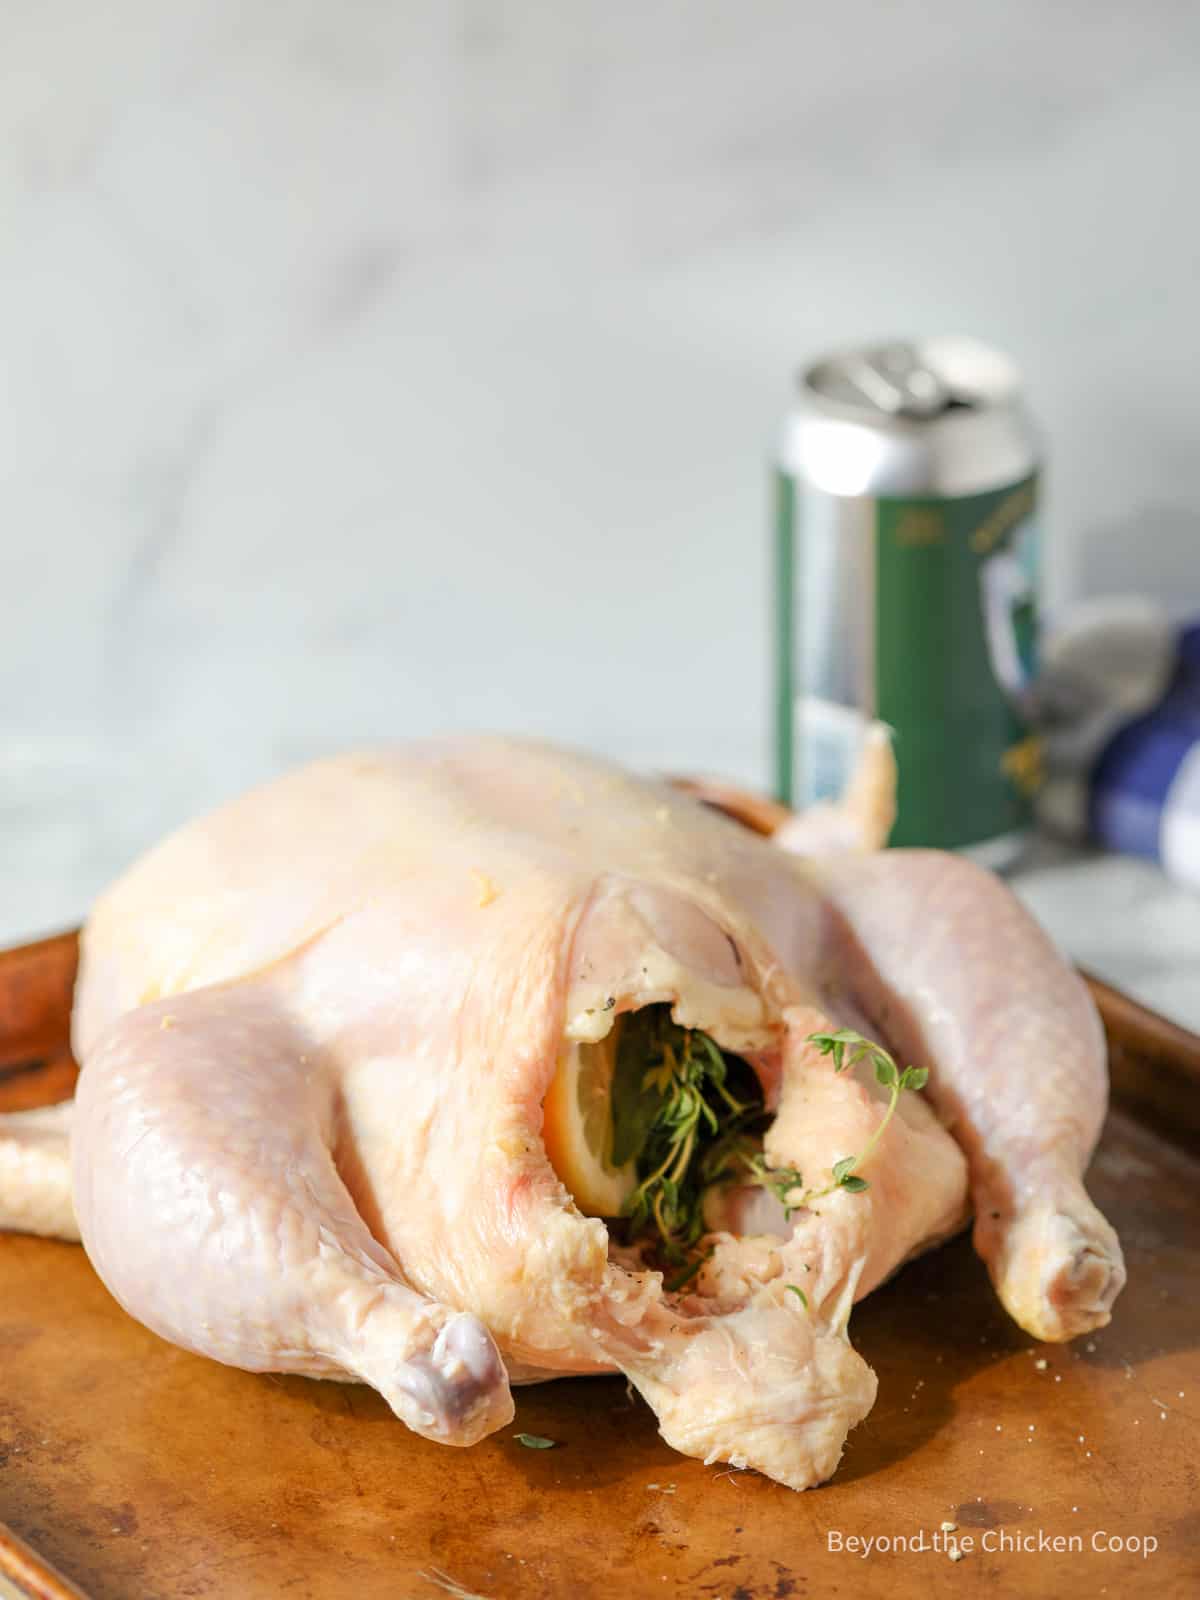 A chicken stuffed with herbs and a lemon.